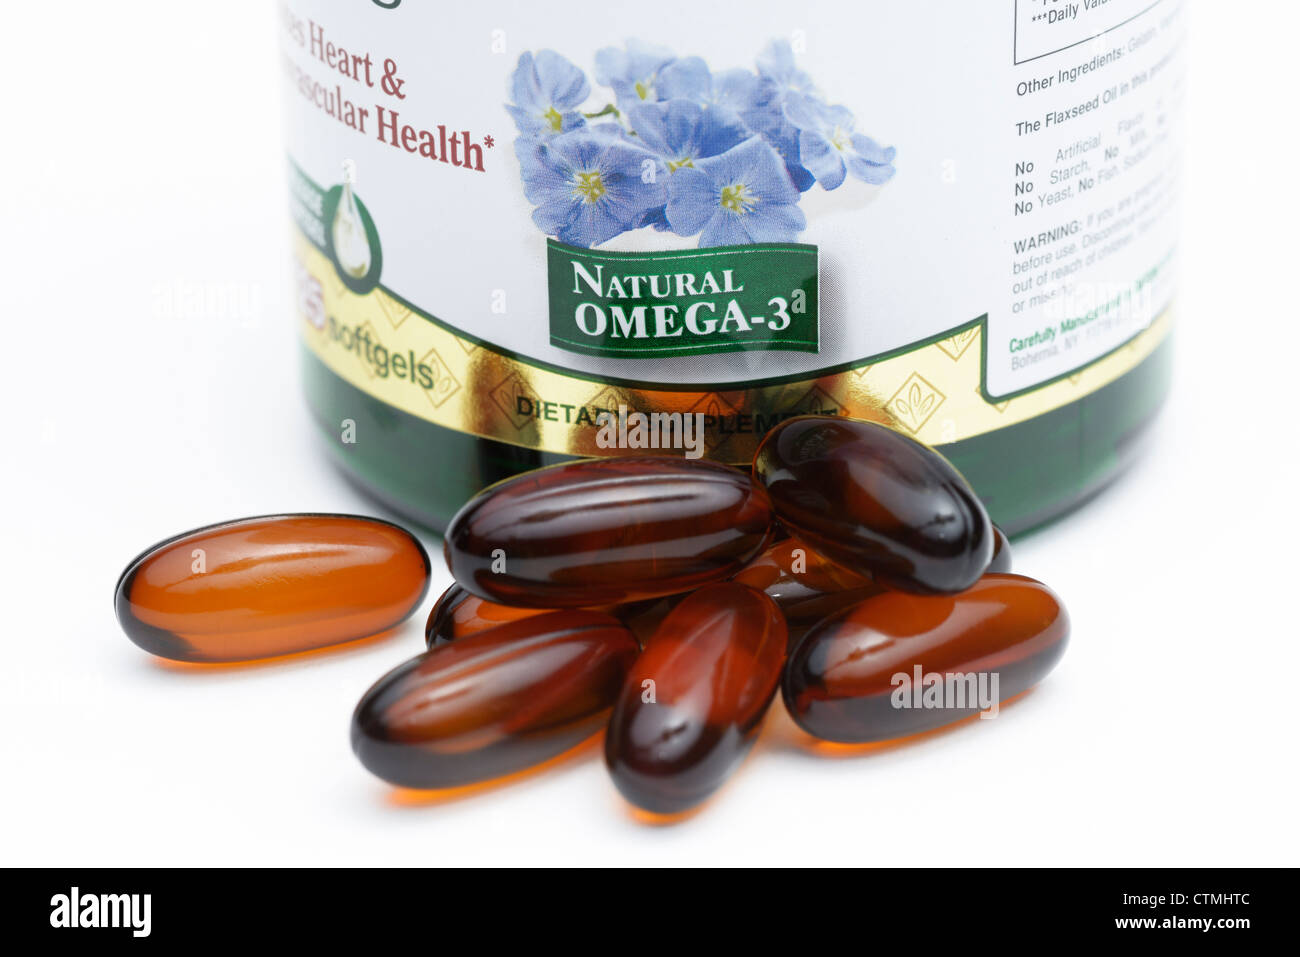 Flaxseed oil pill bottle, a nutritional source of omega-3 and omega-6 fatty acids Stock Photo